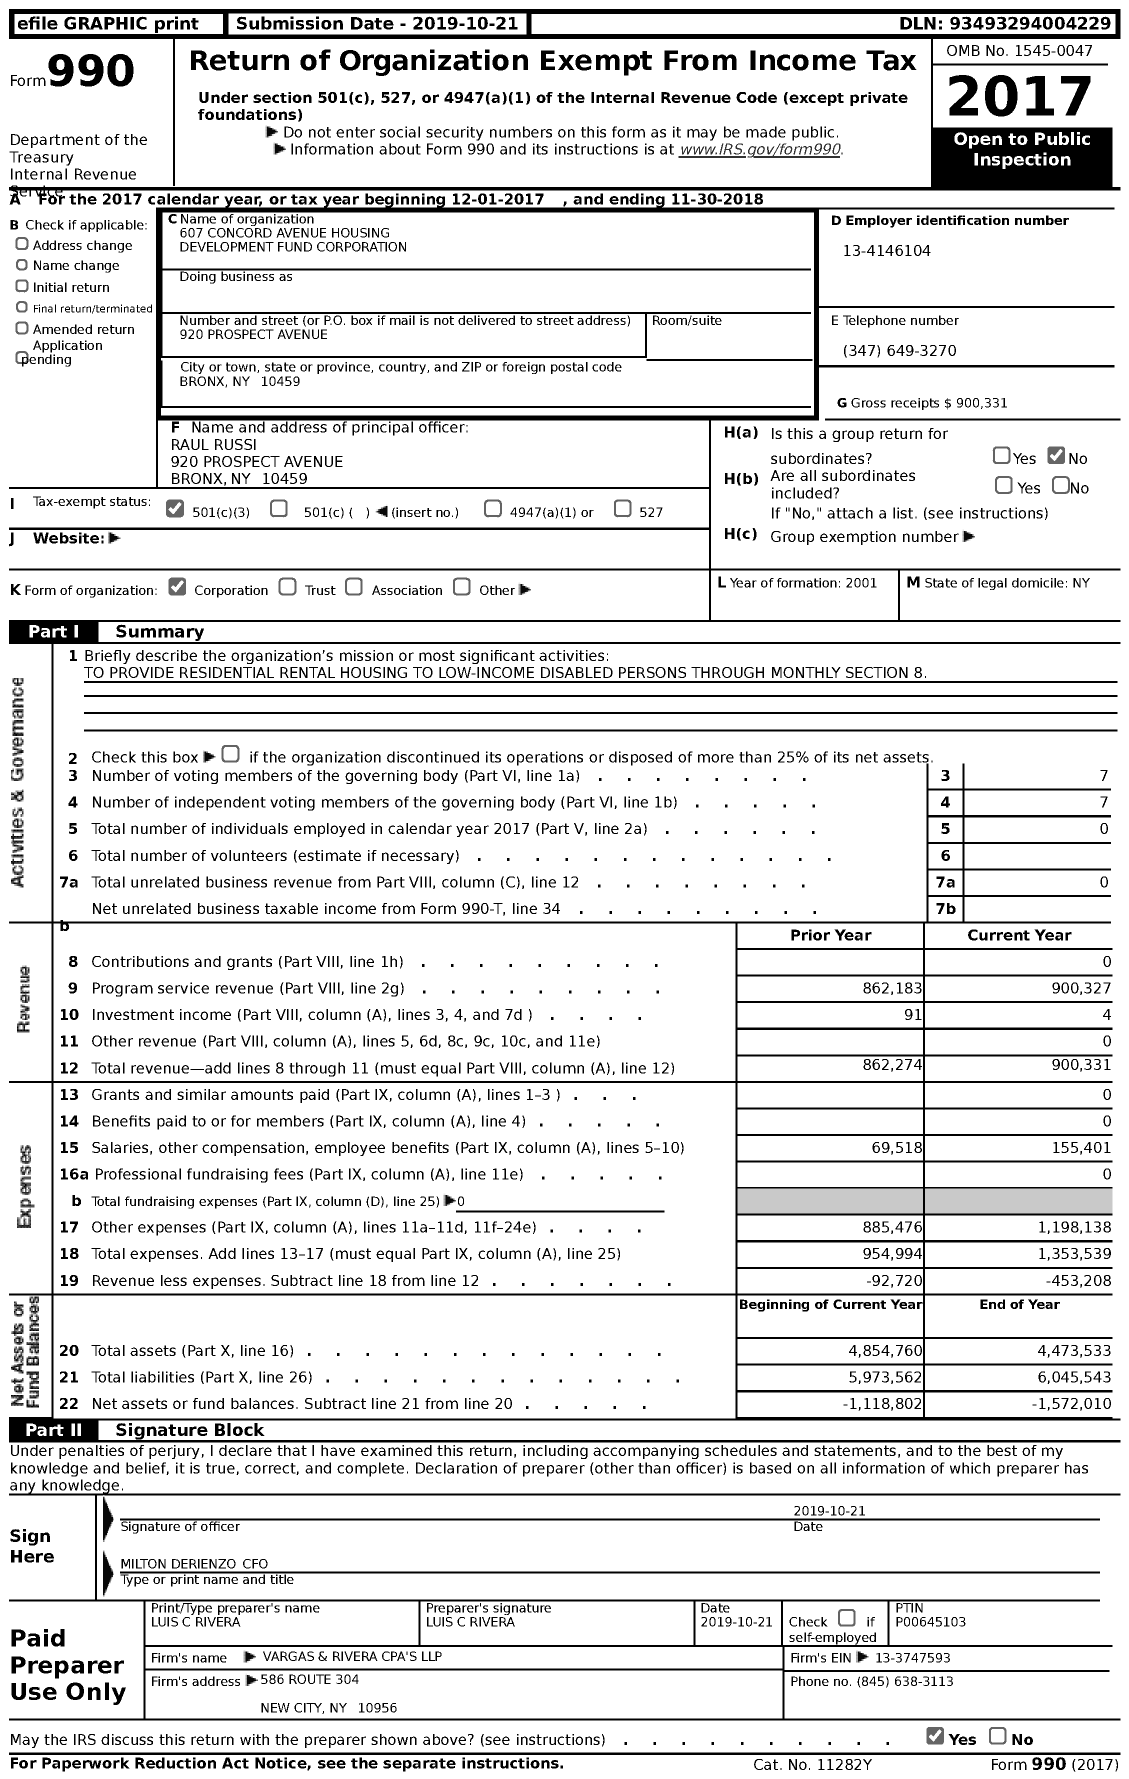 Image of first page of 2017 Form 990 for 607 Concord Avenue Housing Development Fund Corporation